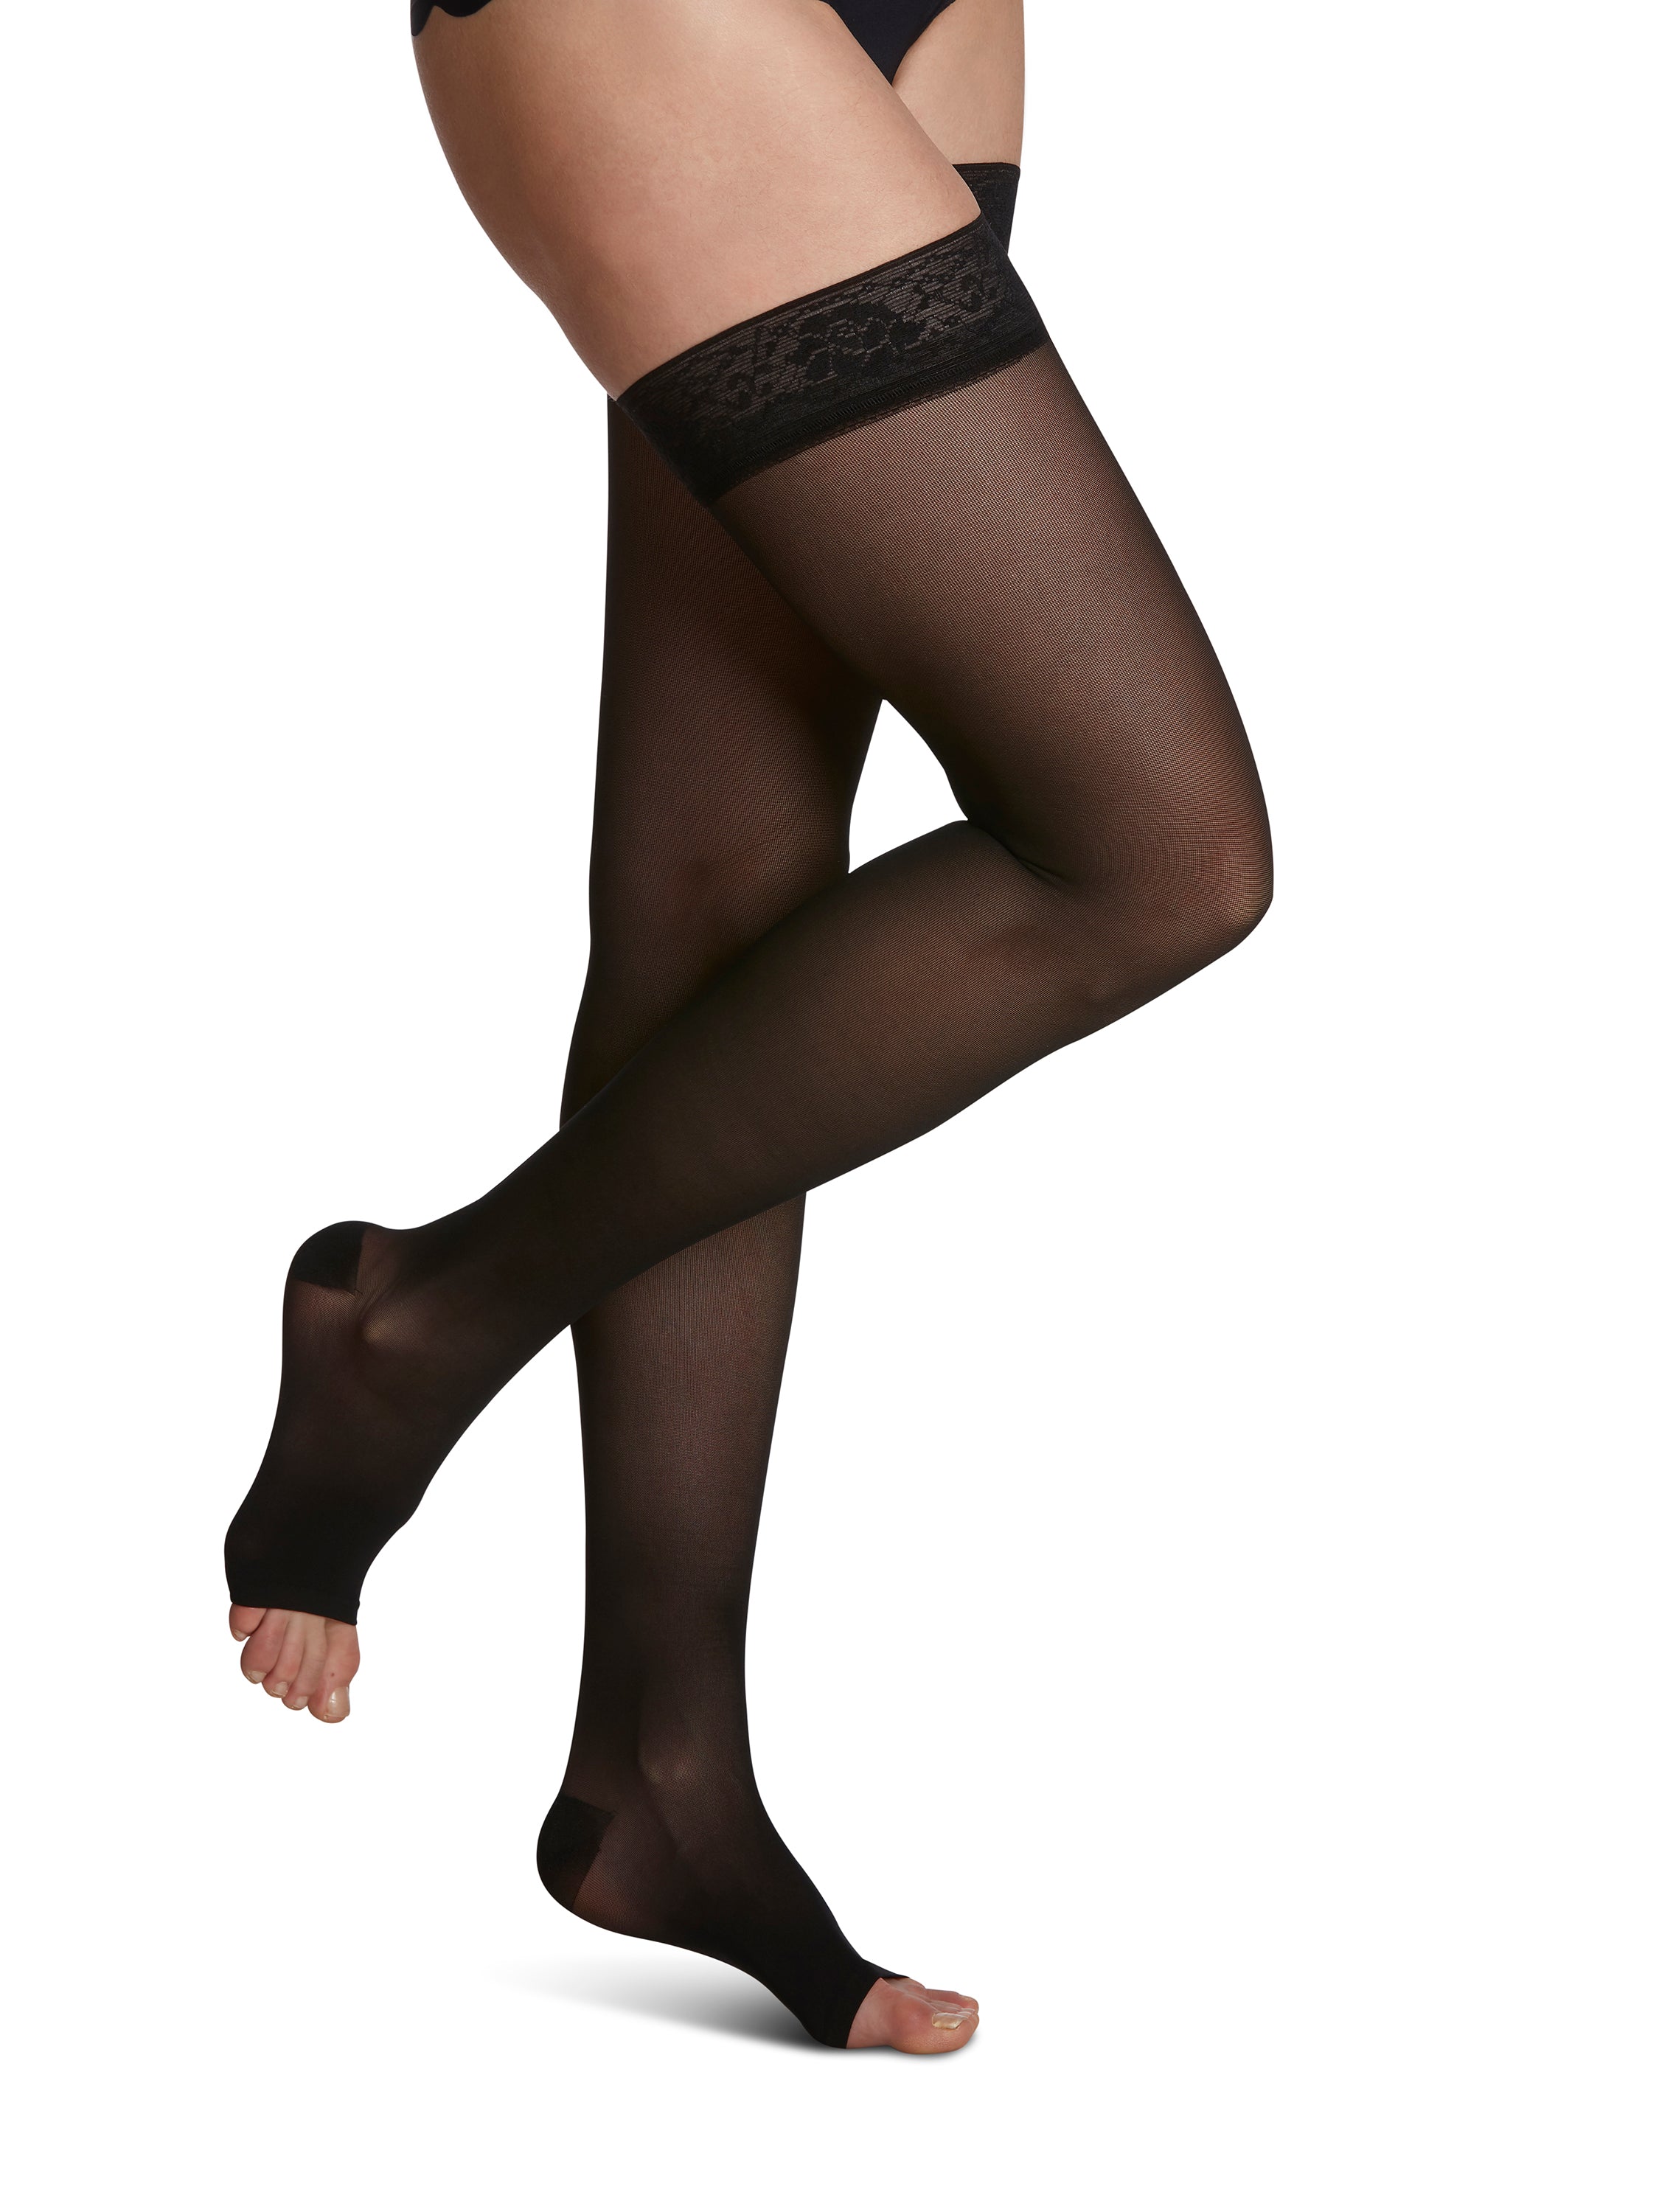 Sigvaris Women's Style Sheer Thigh High with OPEN Toe in Fashion Colors